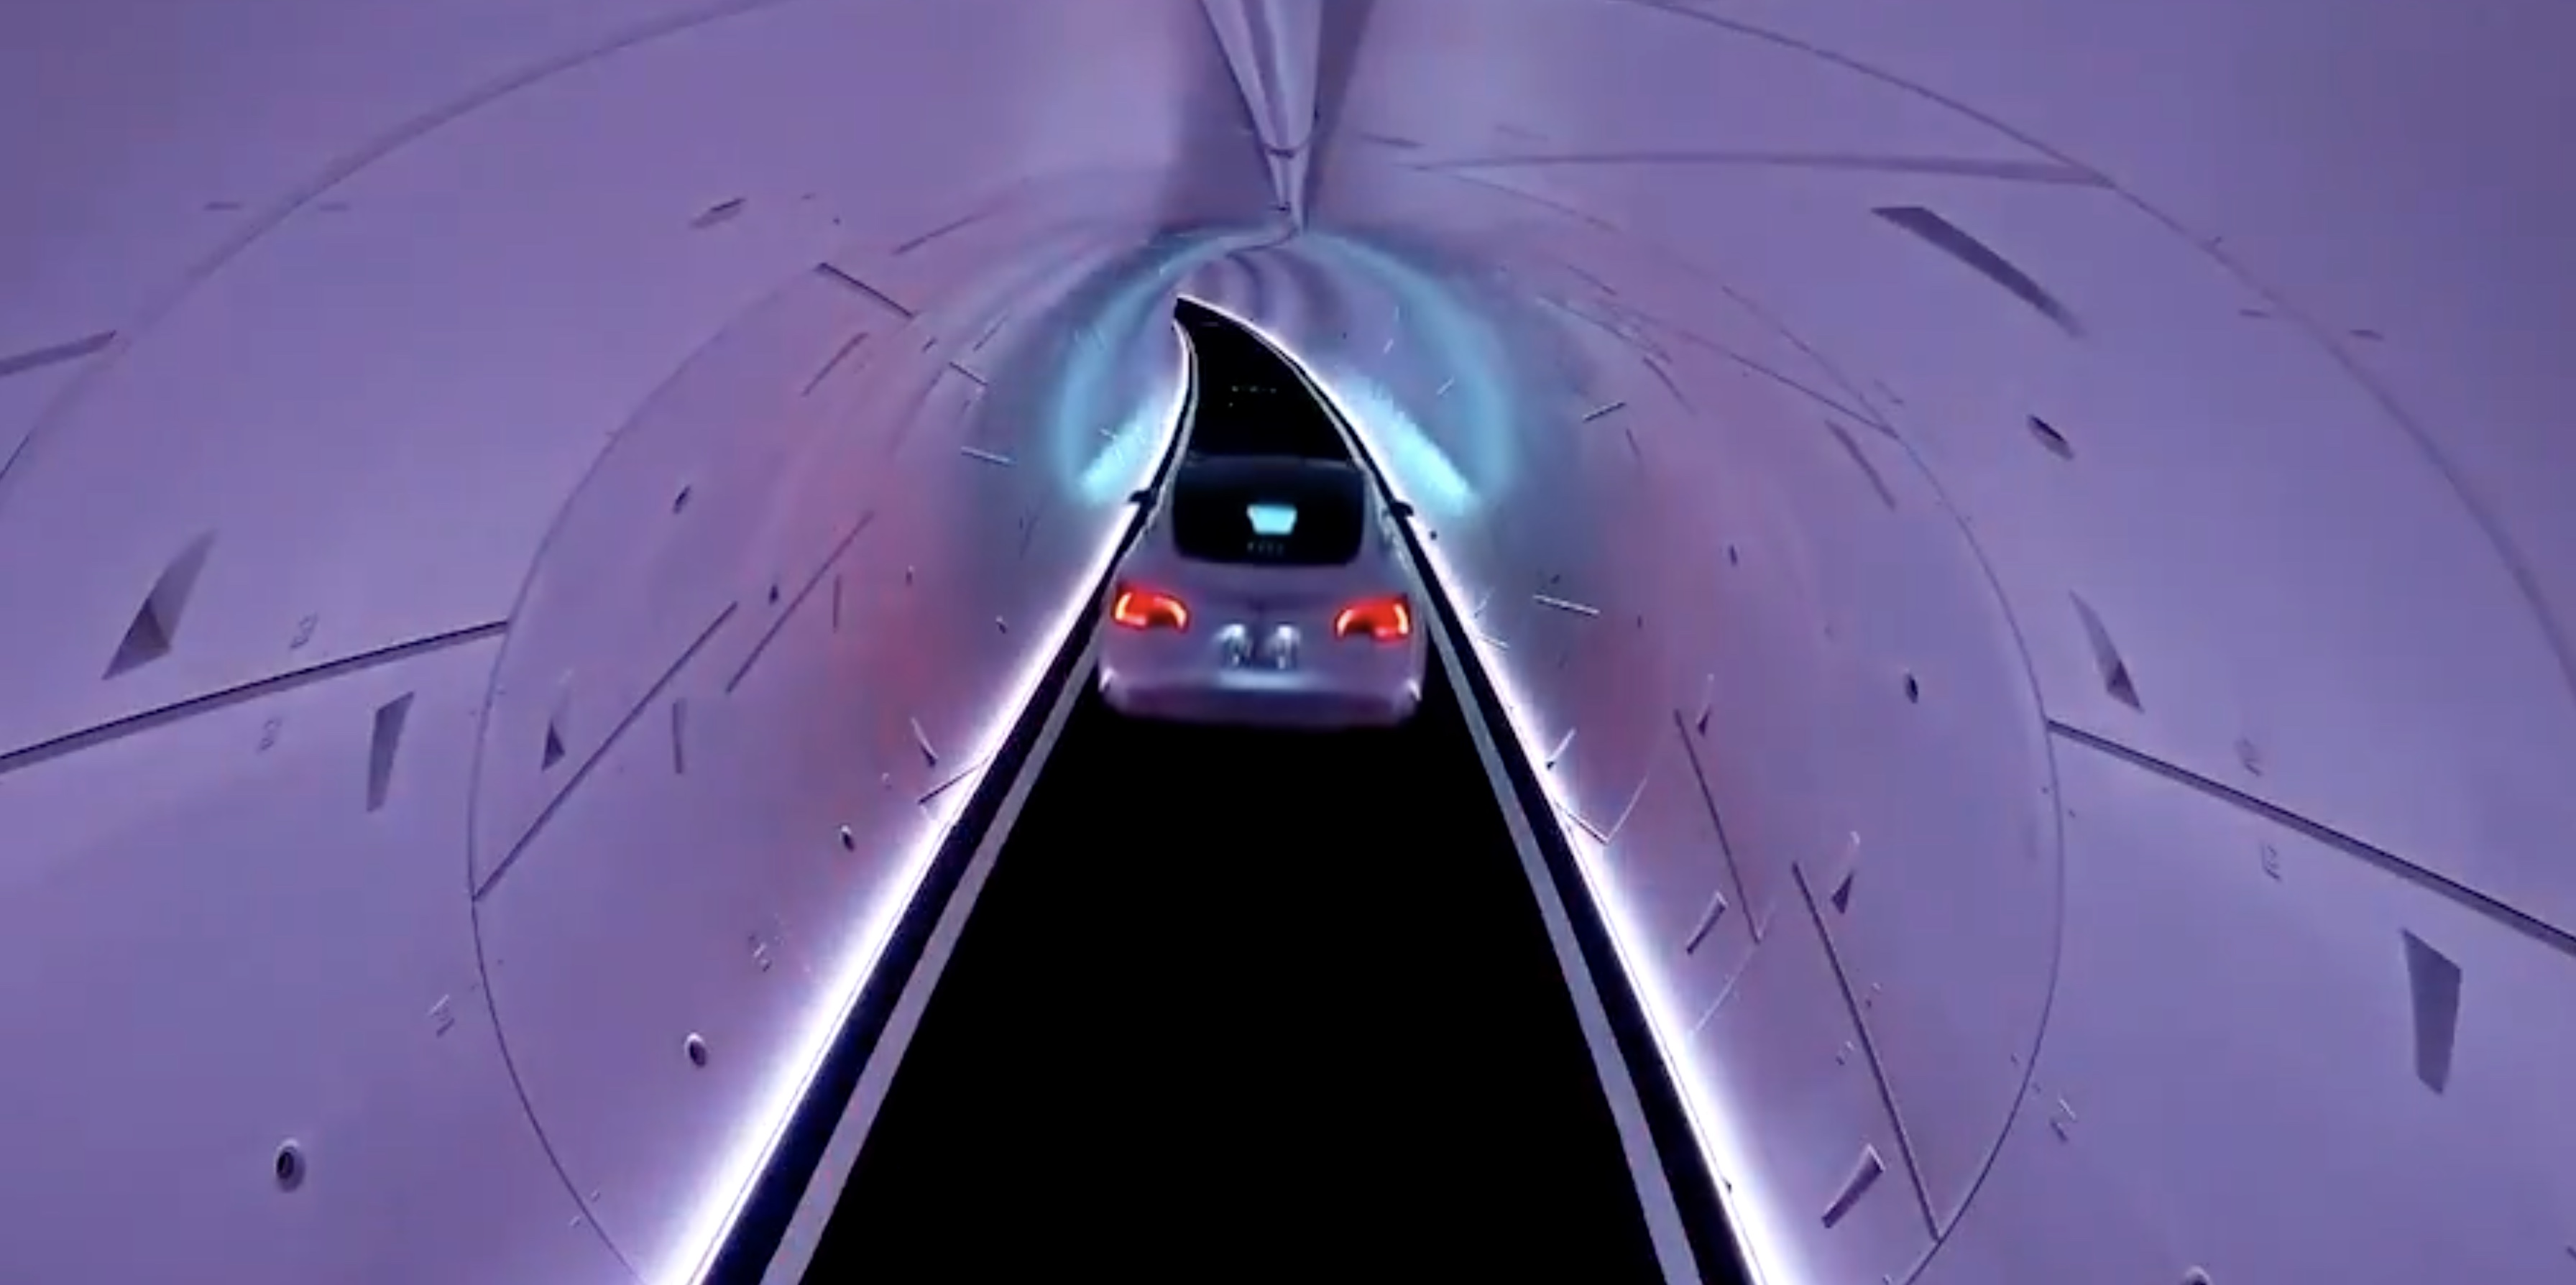 Elon Musk's Vegas Loop approved to extend